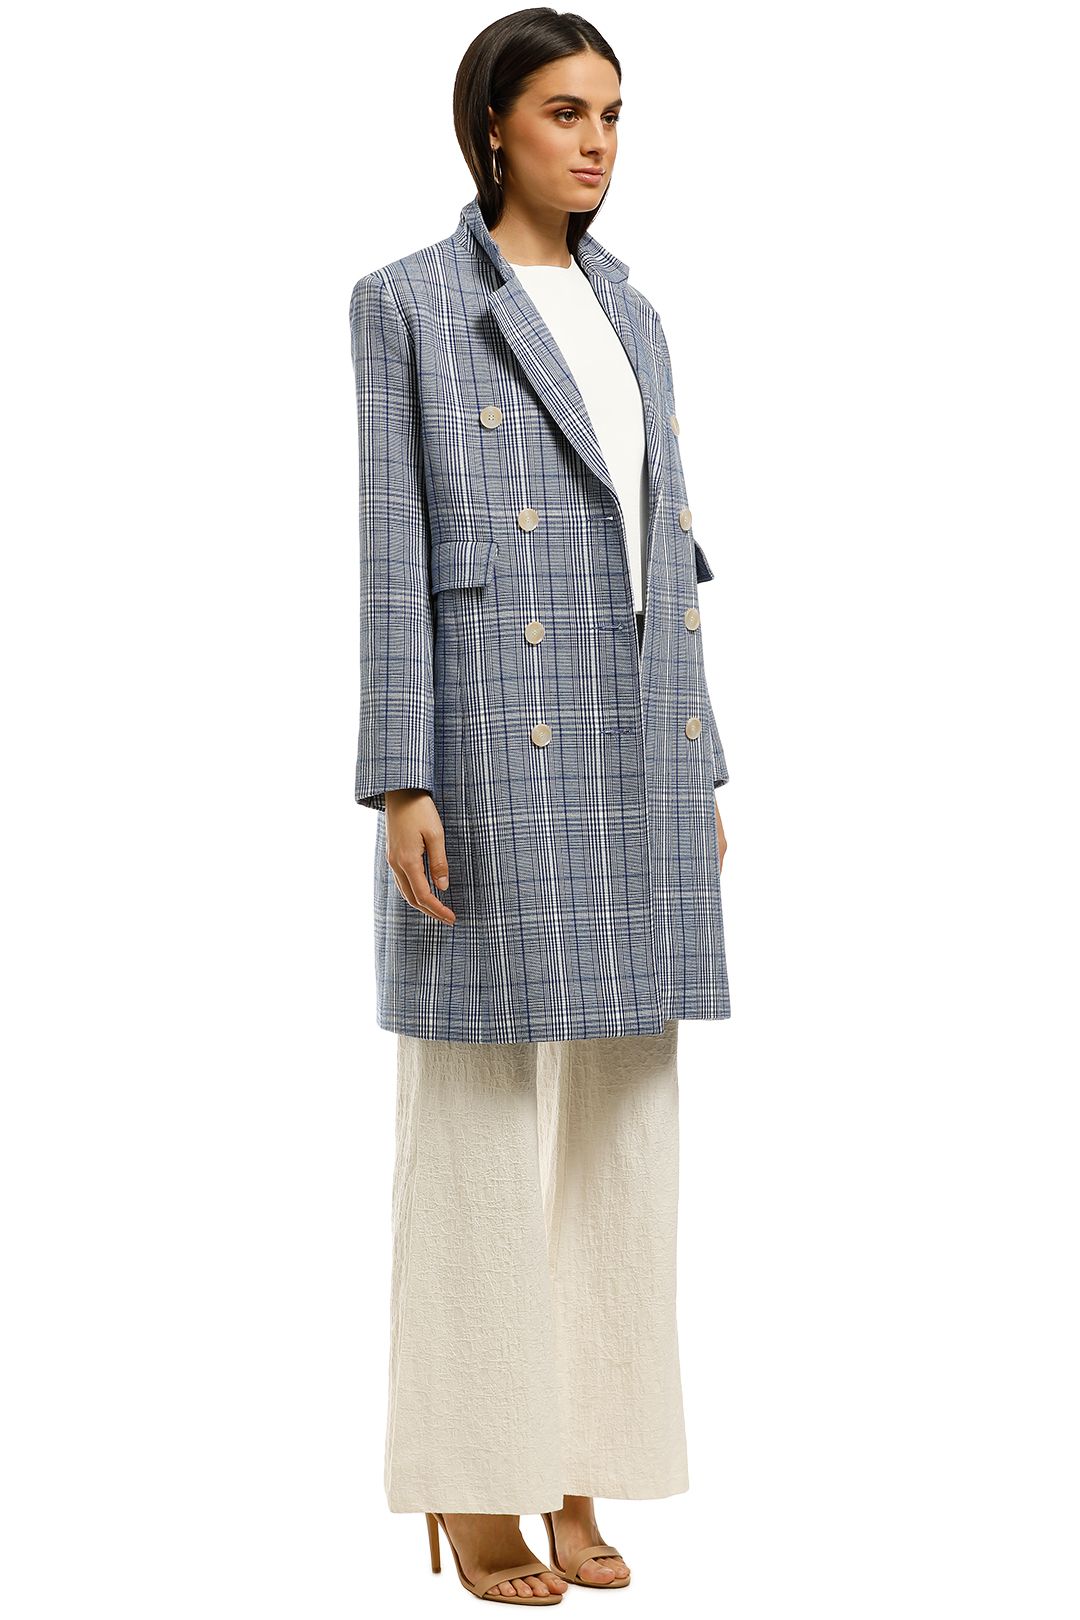 Cooper-By-Trelise-Cooper-Power-Suit-Coat-Blue-Check-Side